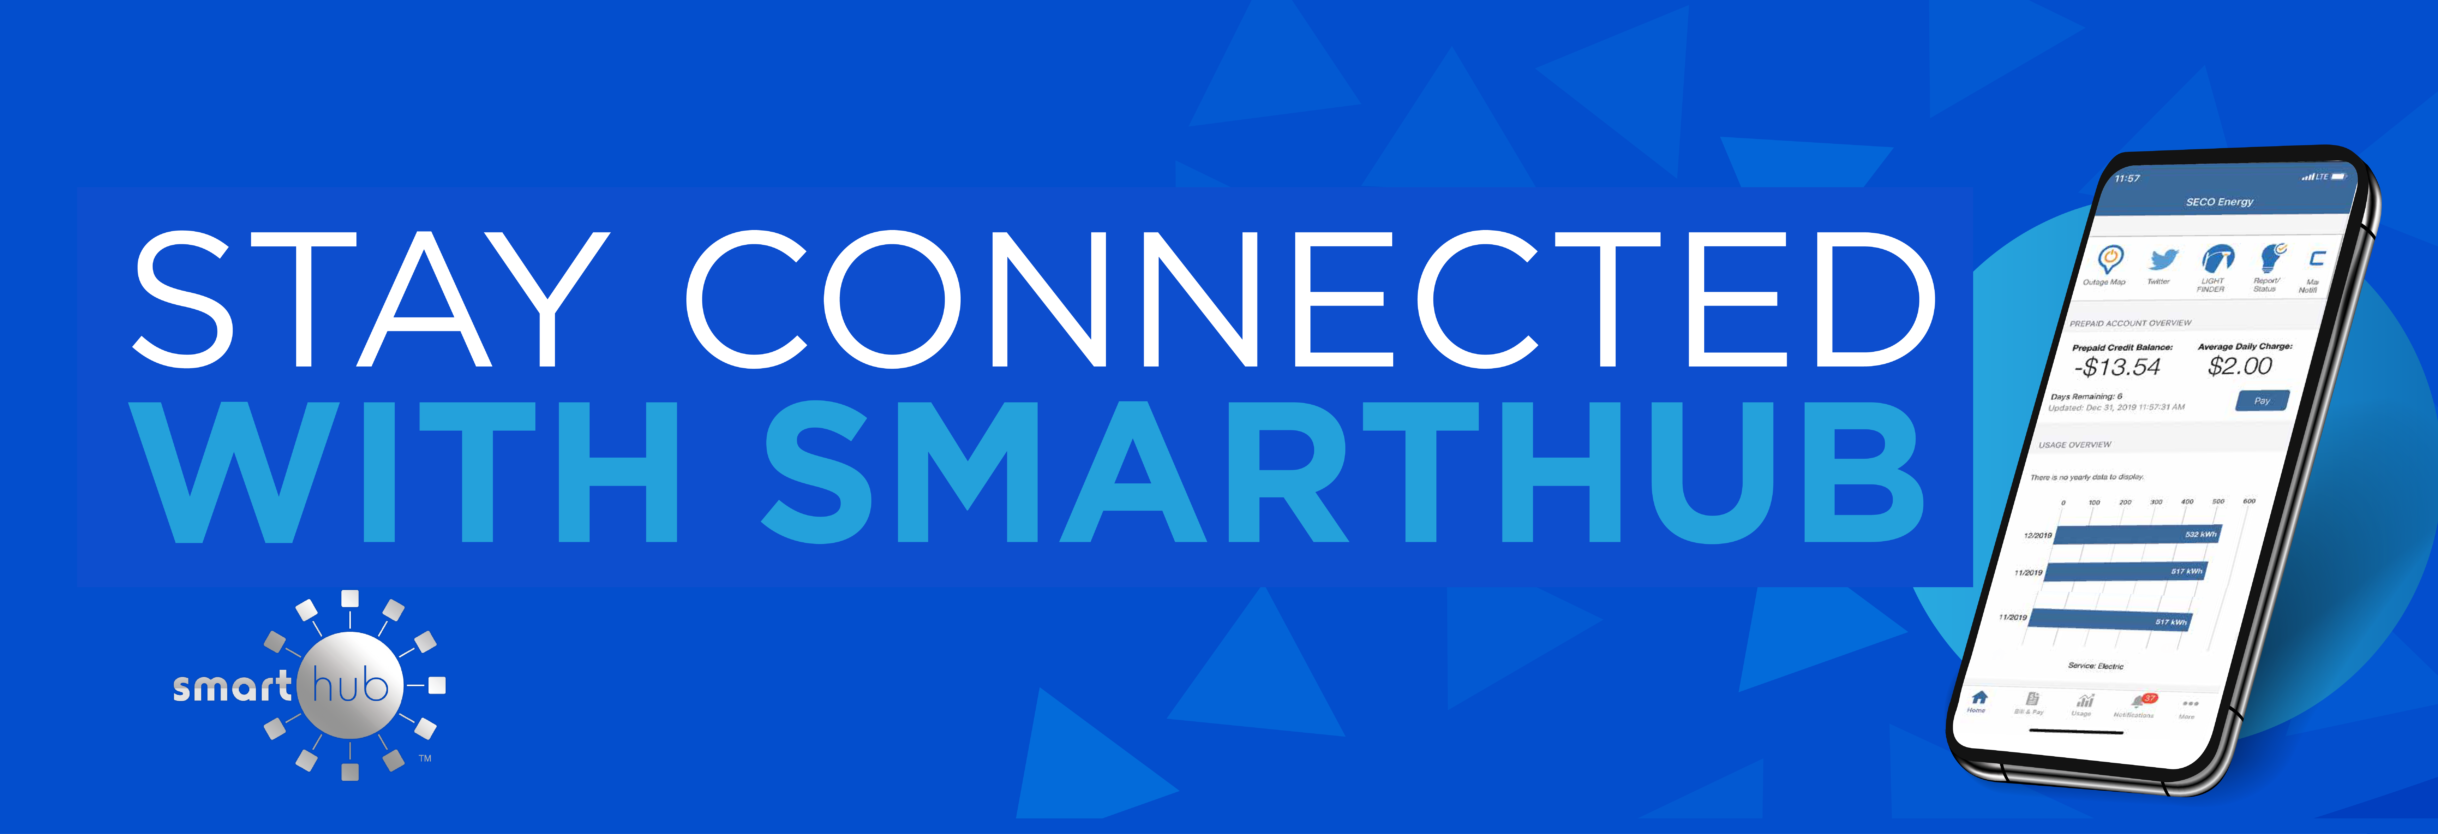 SECO News August 2020: Stay Connected With Smarthub